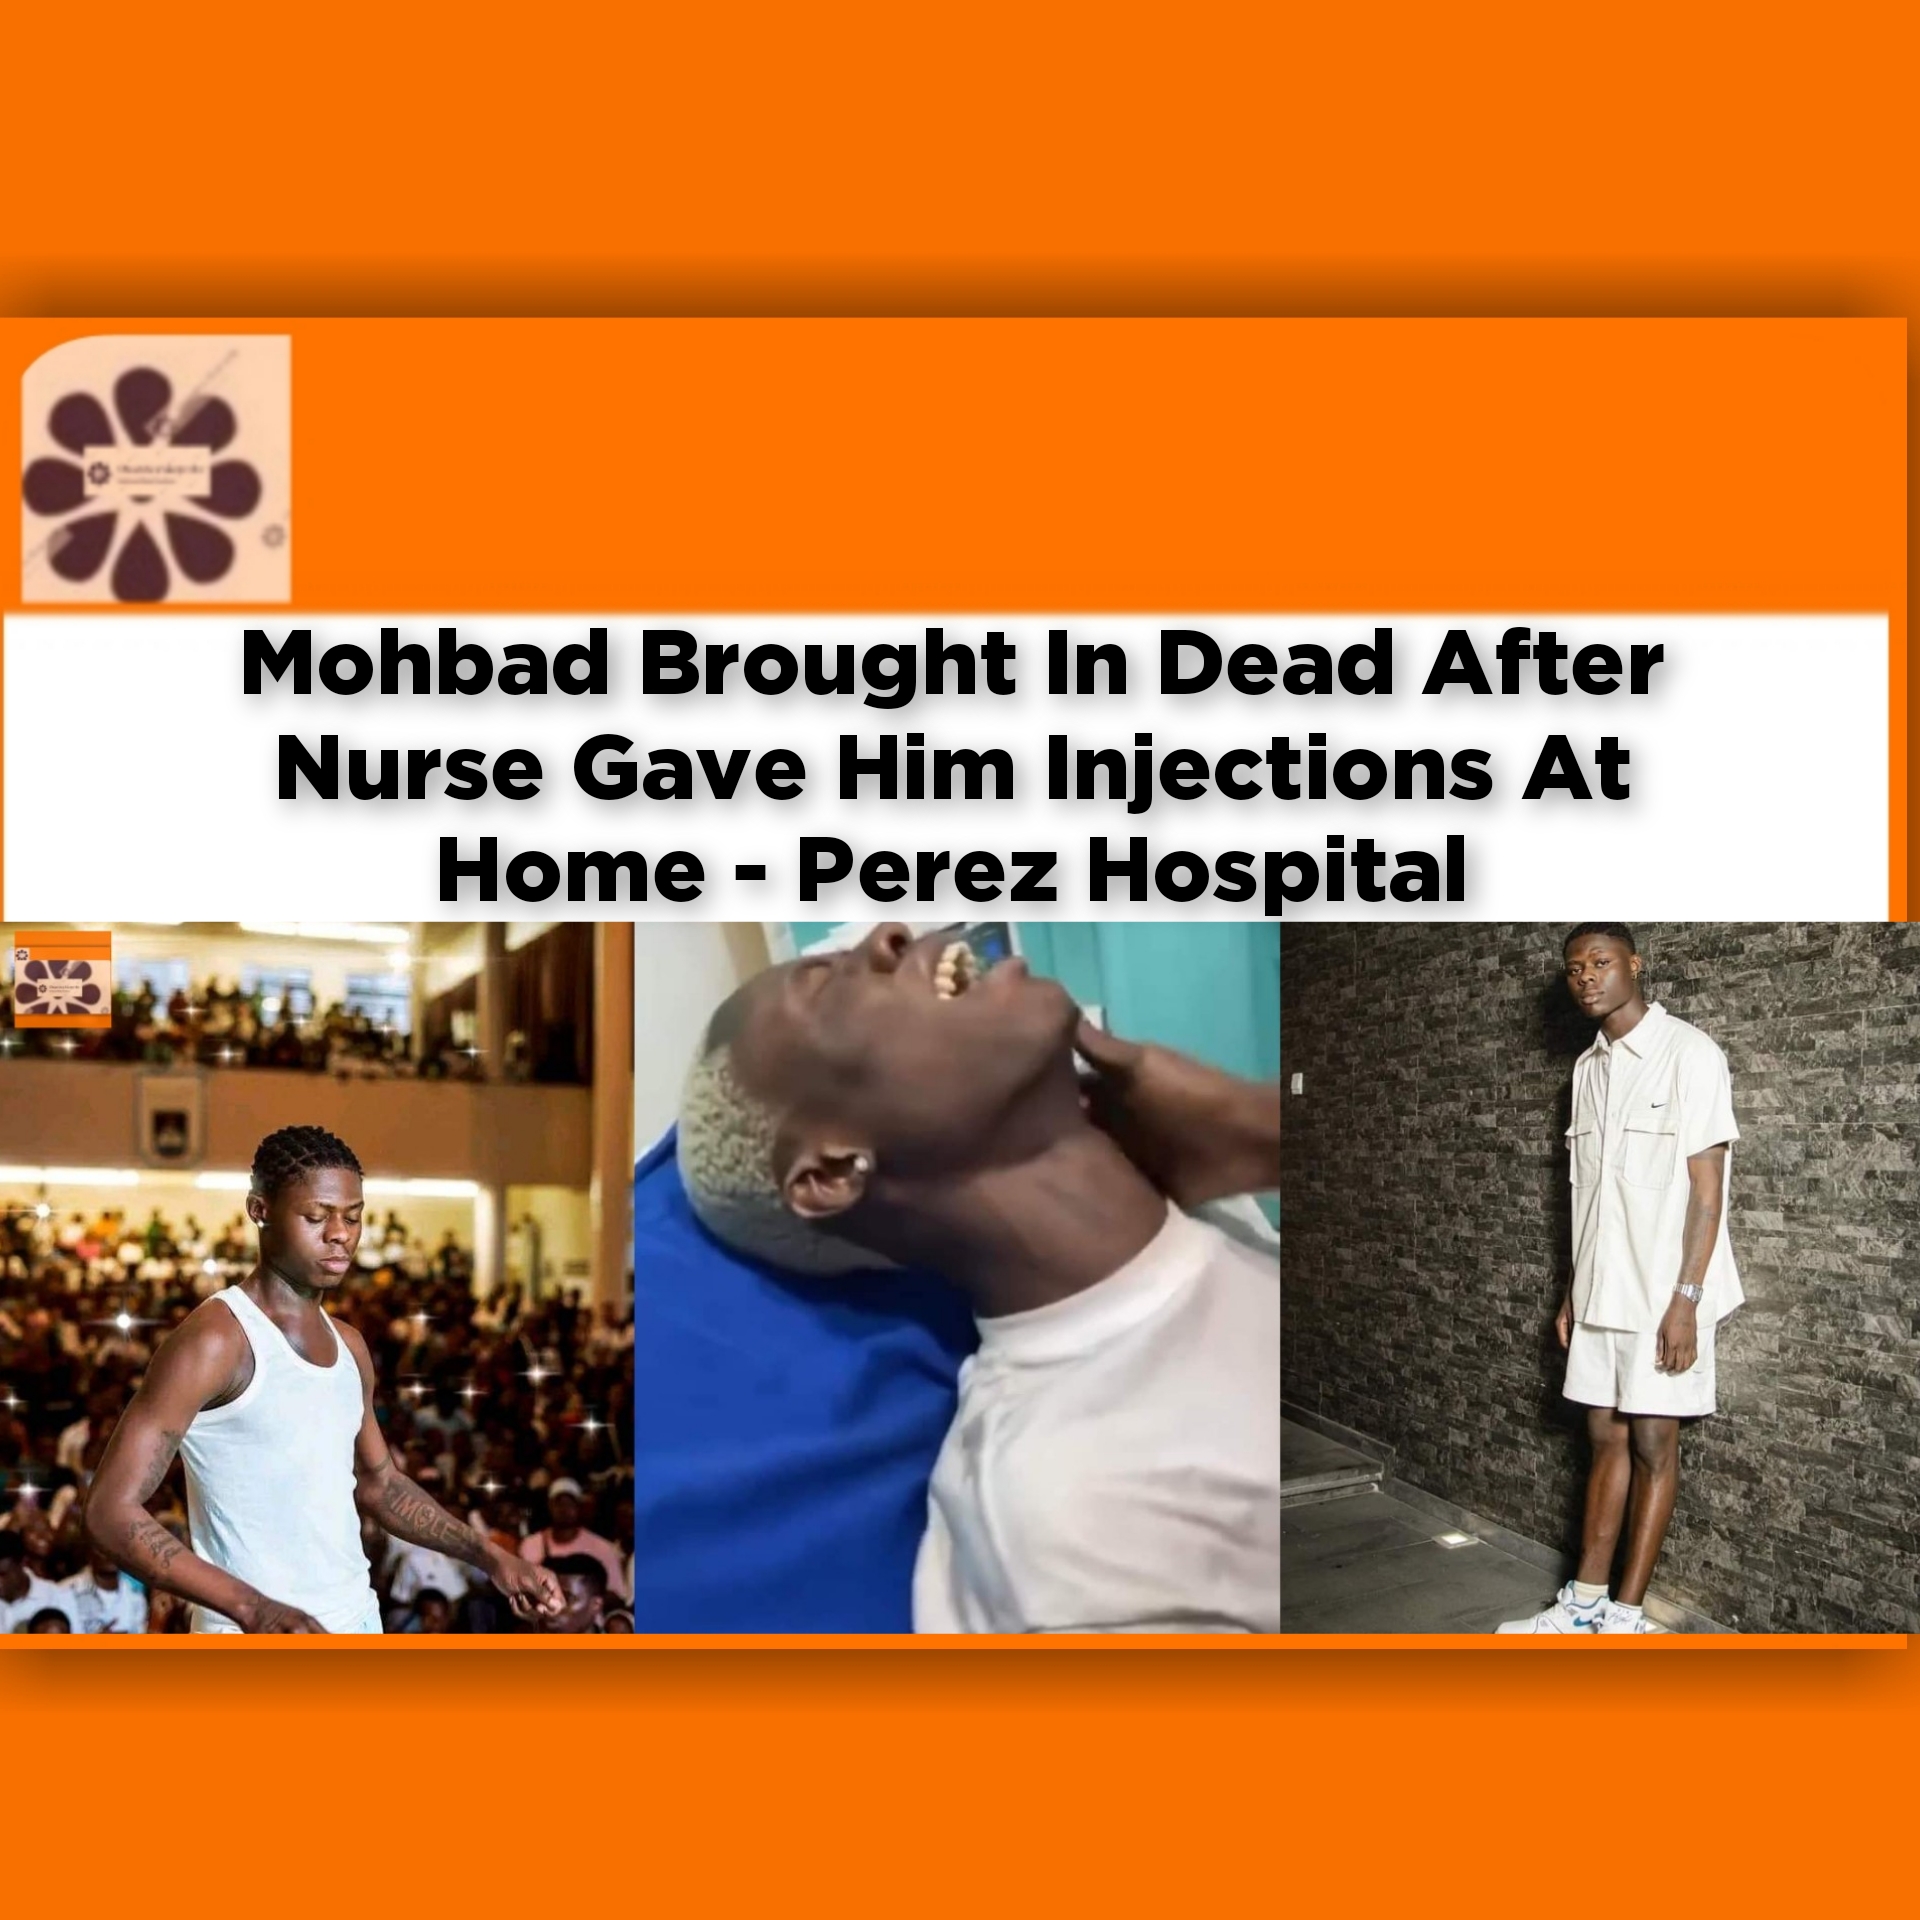 Mohbad Brought In Dead After Nurse Gave Him Injections At Home - Perez Hospital ~ OsazuwaAkonedo #Bakassi